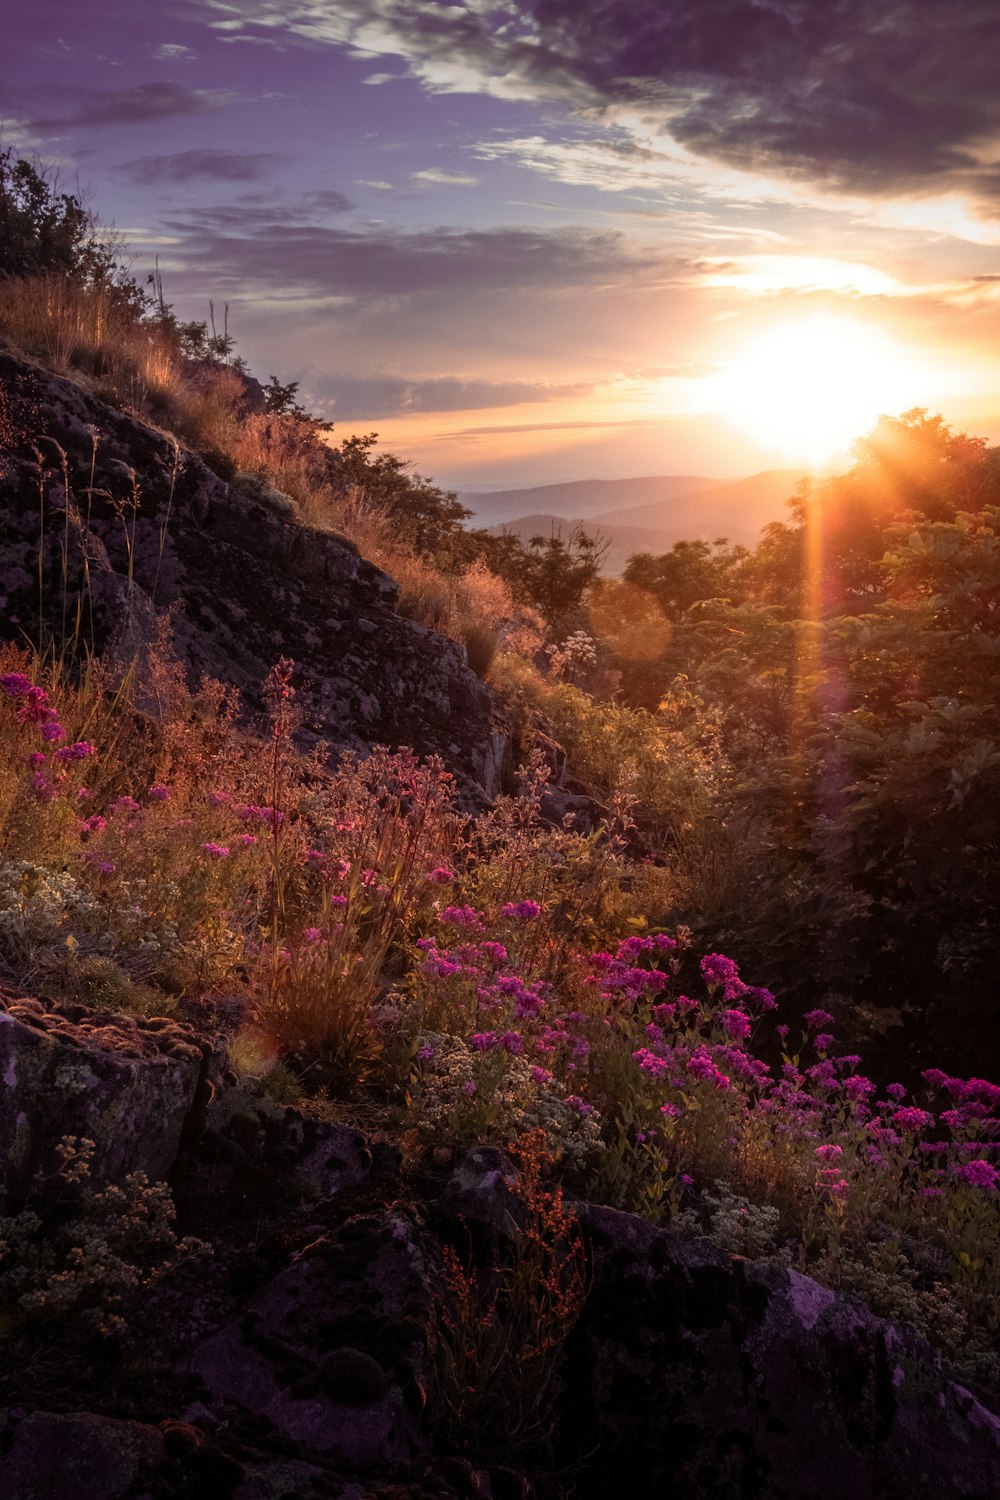 pink flowers on brown rocky mountain during sunset